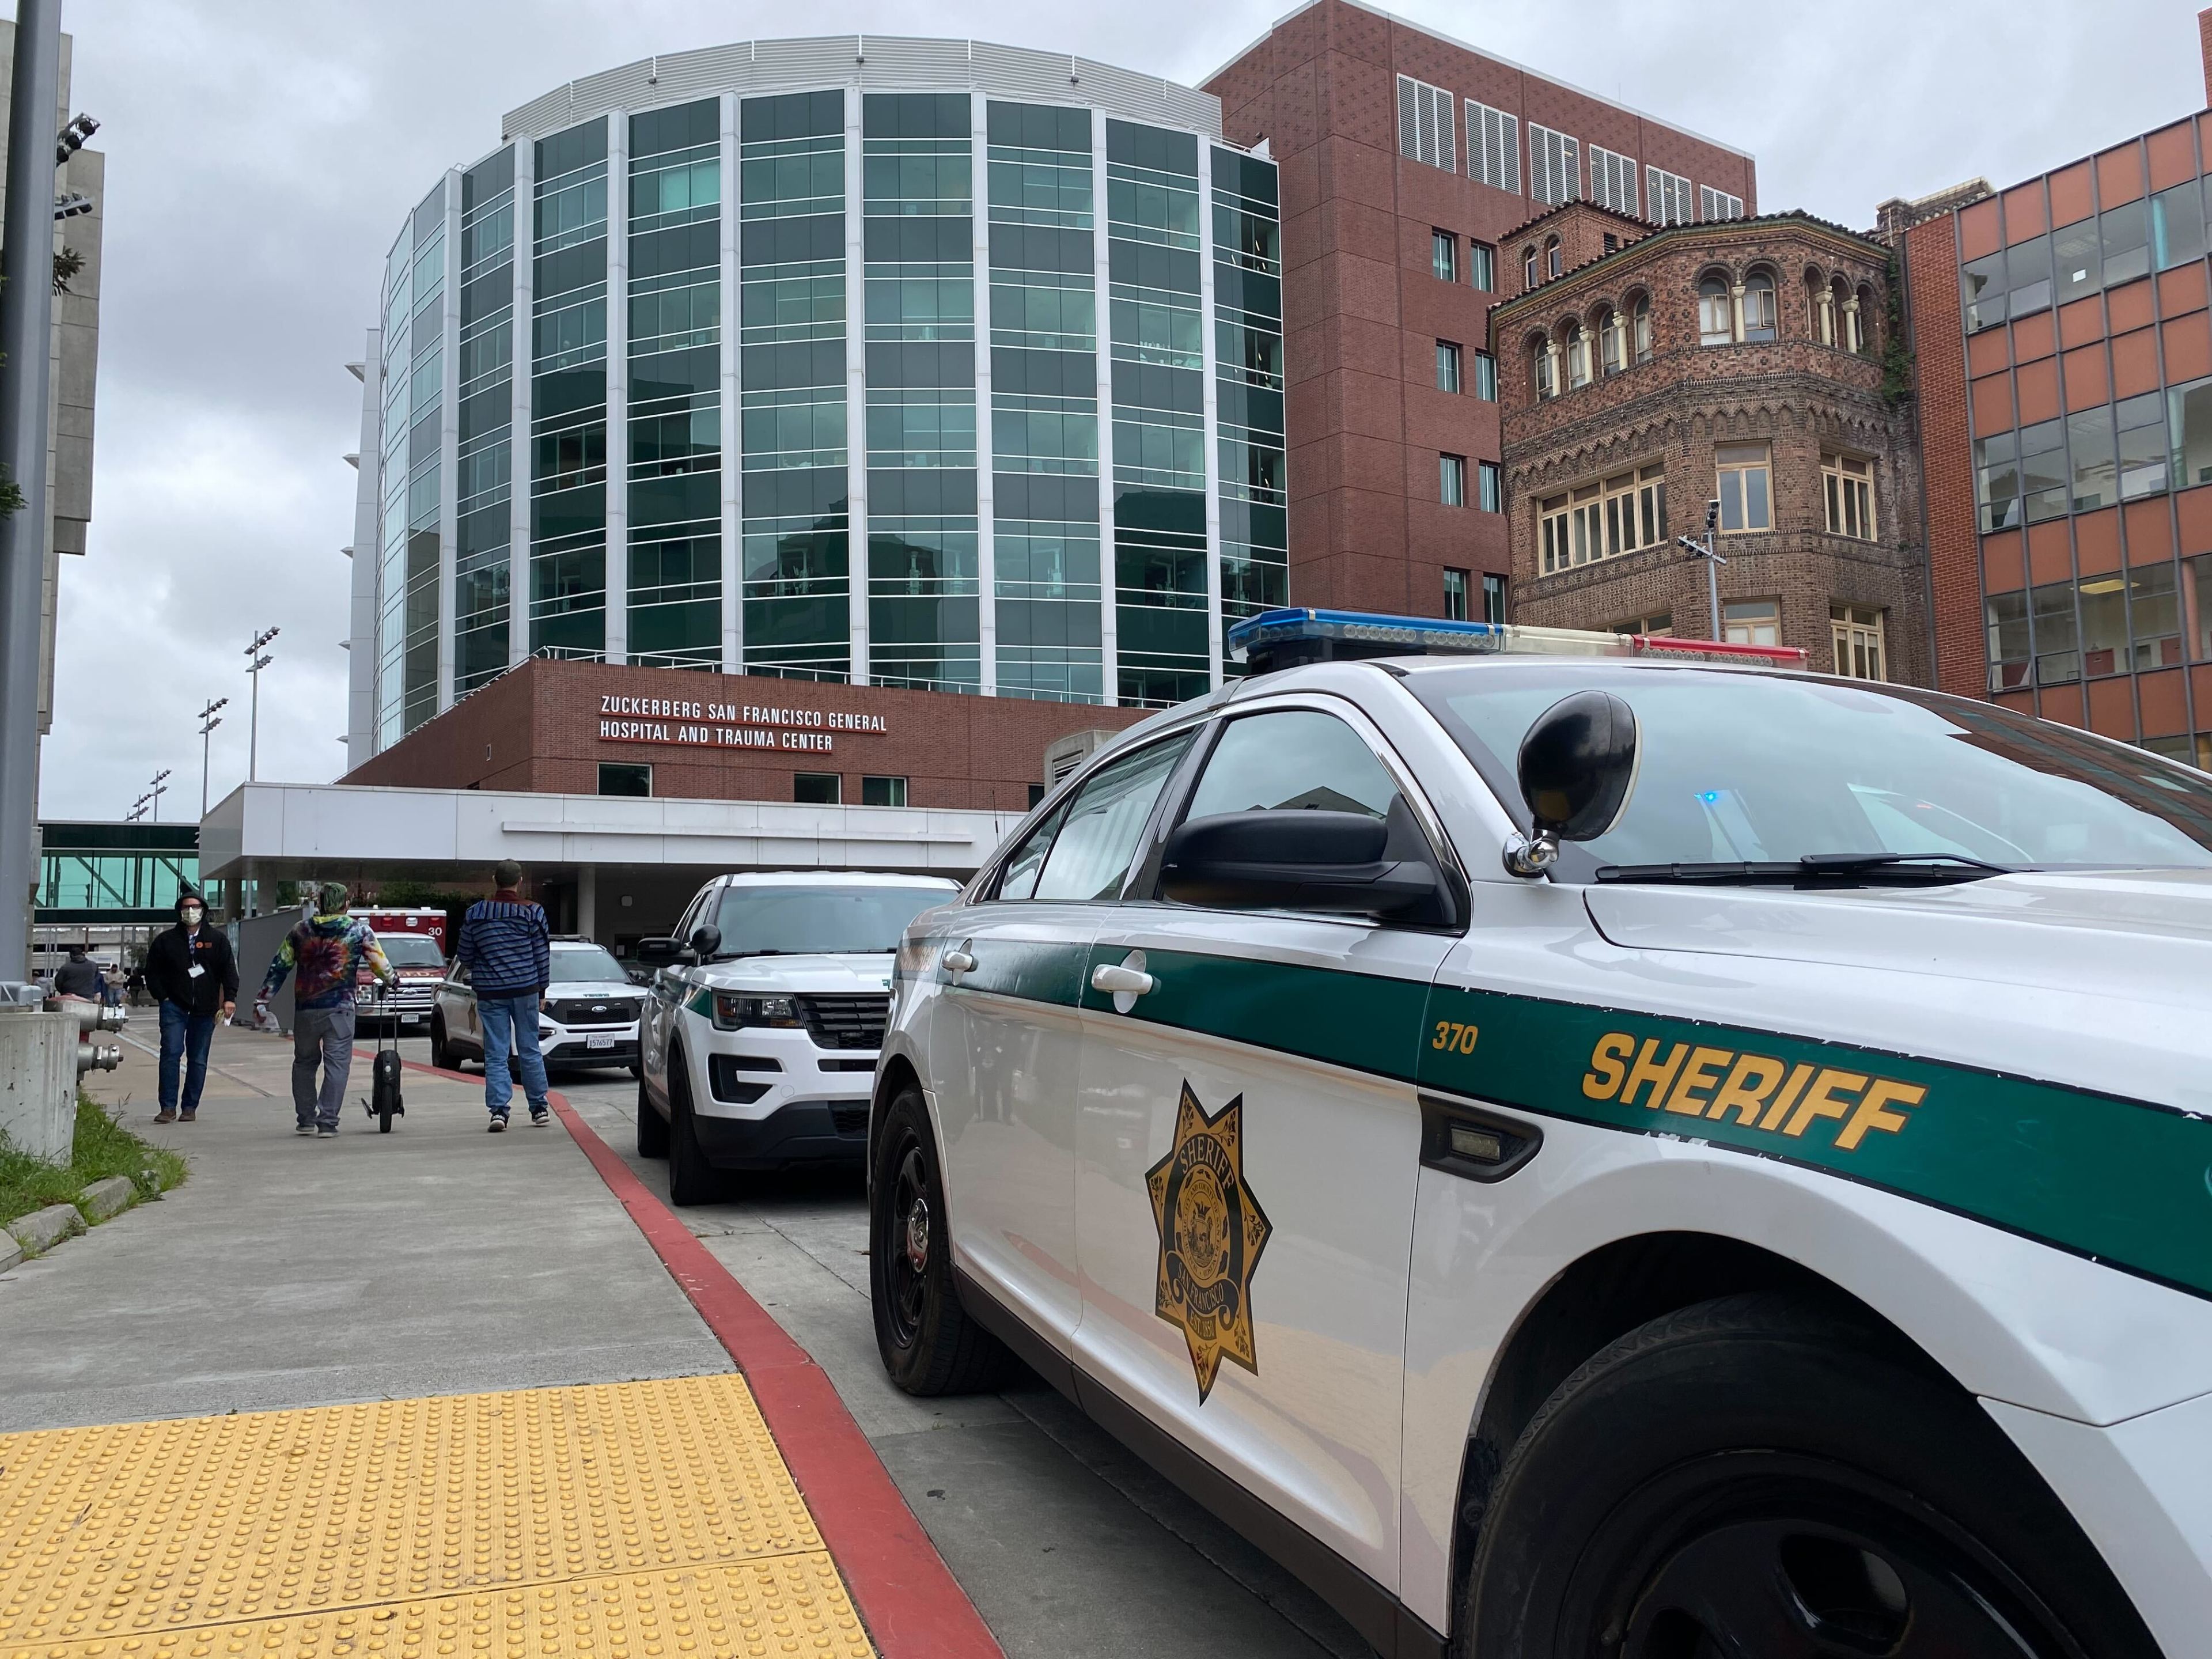 Sheriff cars in front of a hospital with pedestrians nearby.